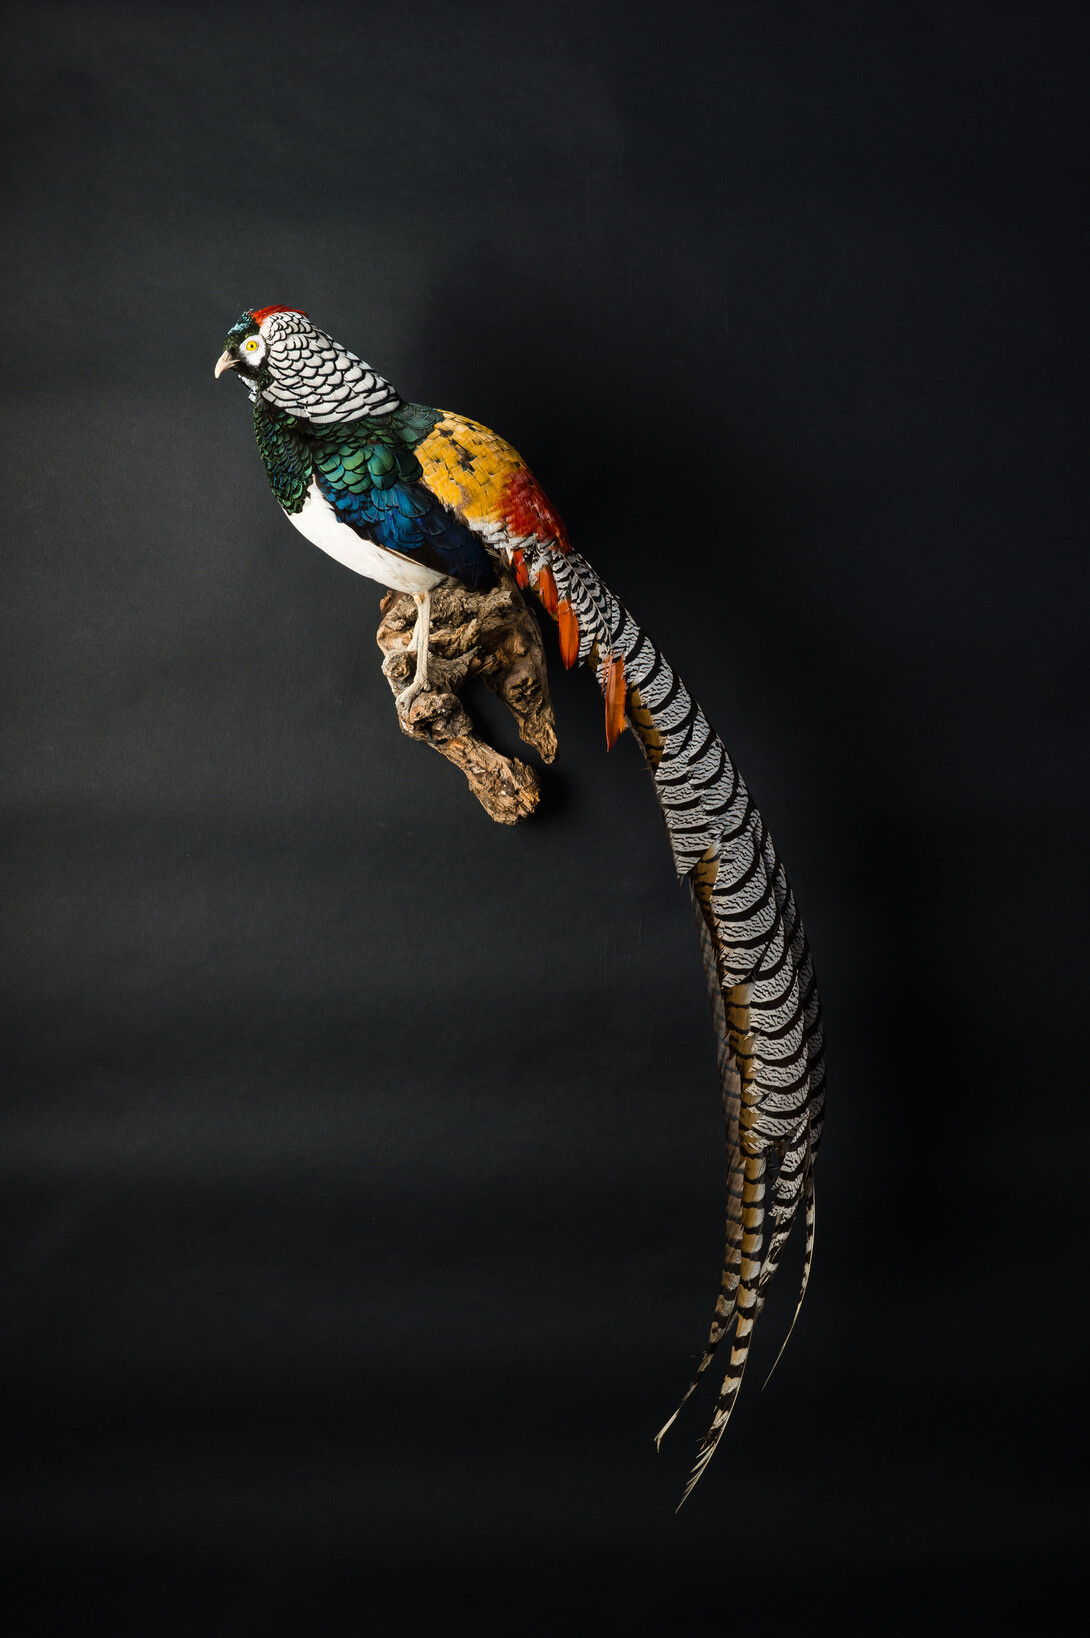 The "Game Birds of the World" exhibit will include more than 160 birds on display, including this Lady Amherst's pheasant. The exhibit is open 1 to 4 p.m. Sept. 20 in Hardin Hall.